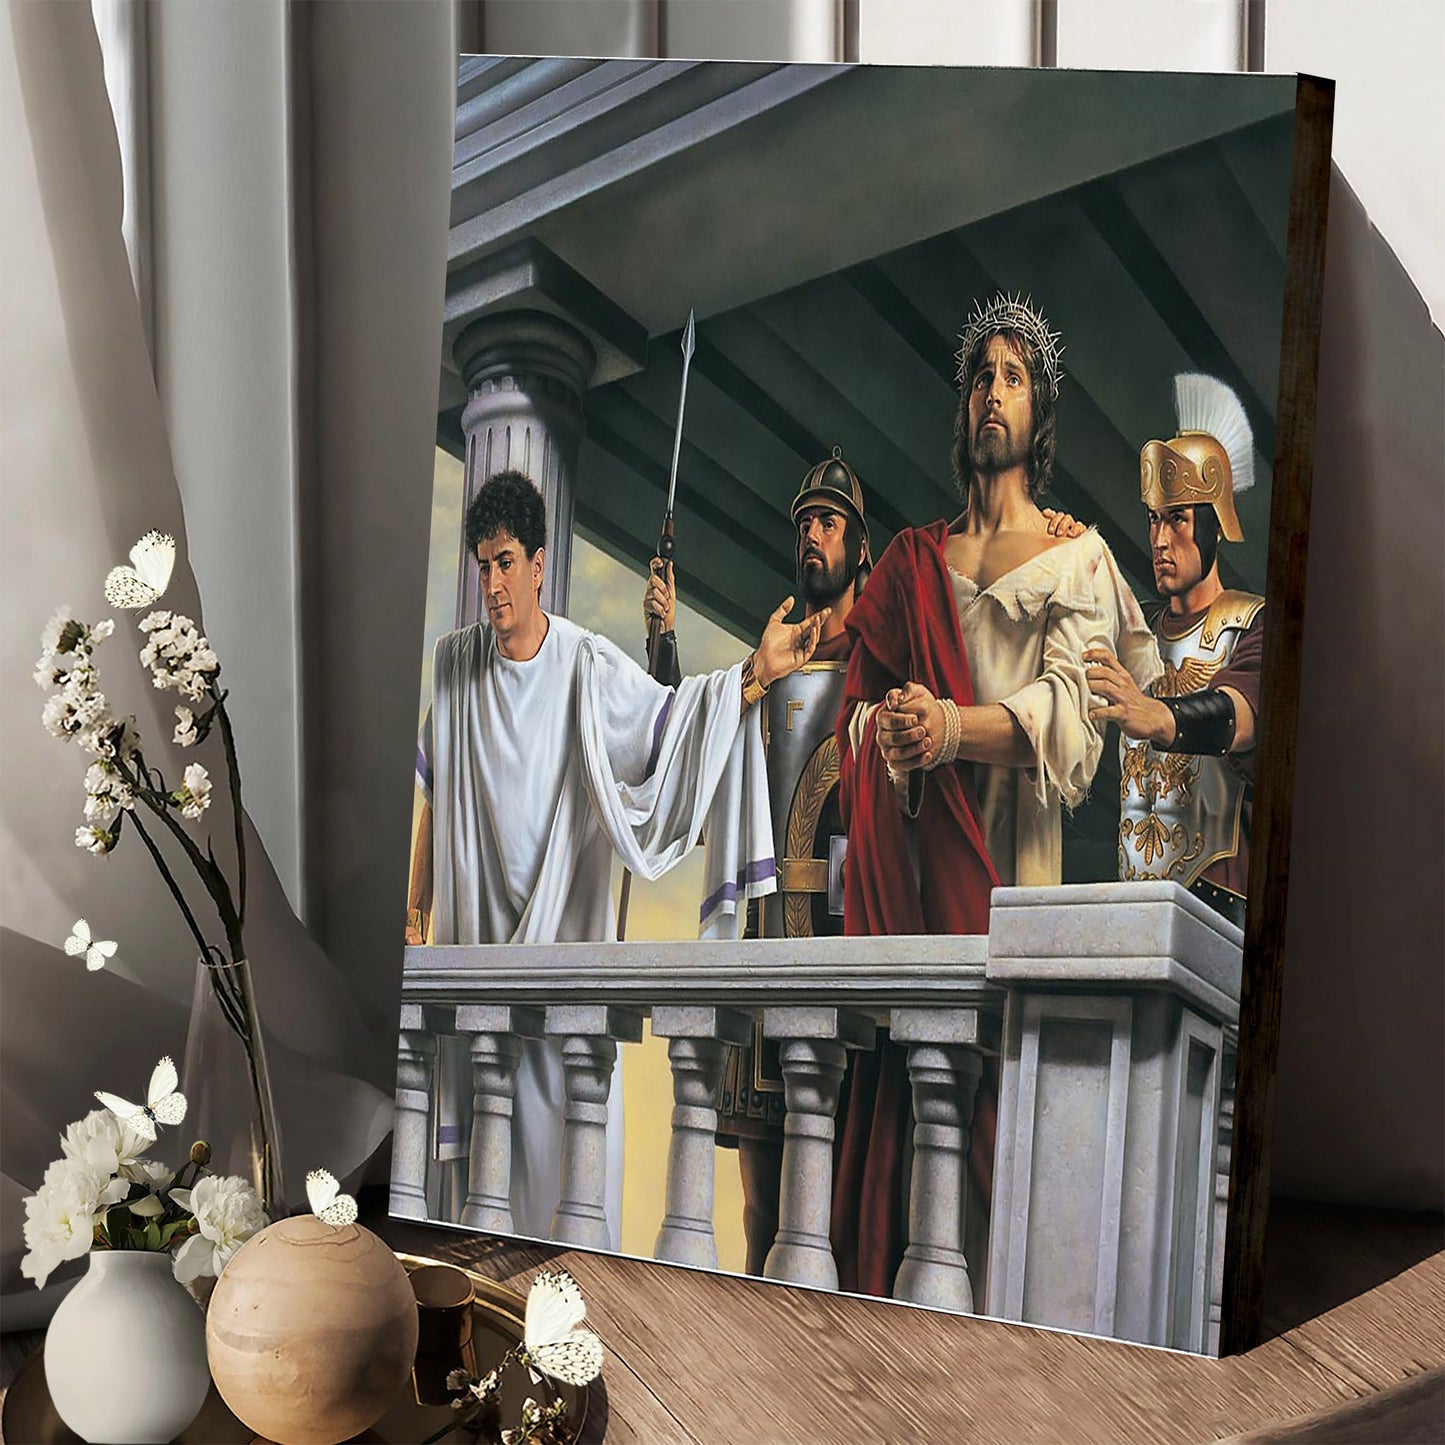 Jesus Is Arrested - Canvas Pictures - Jesus Canvas Art - Christian Wall Art